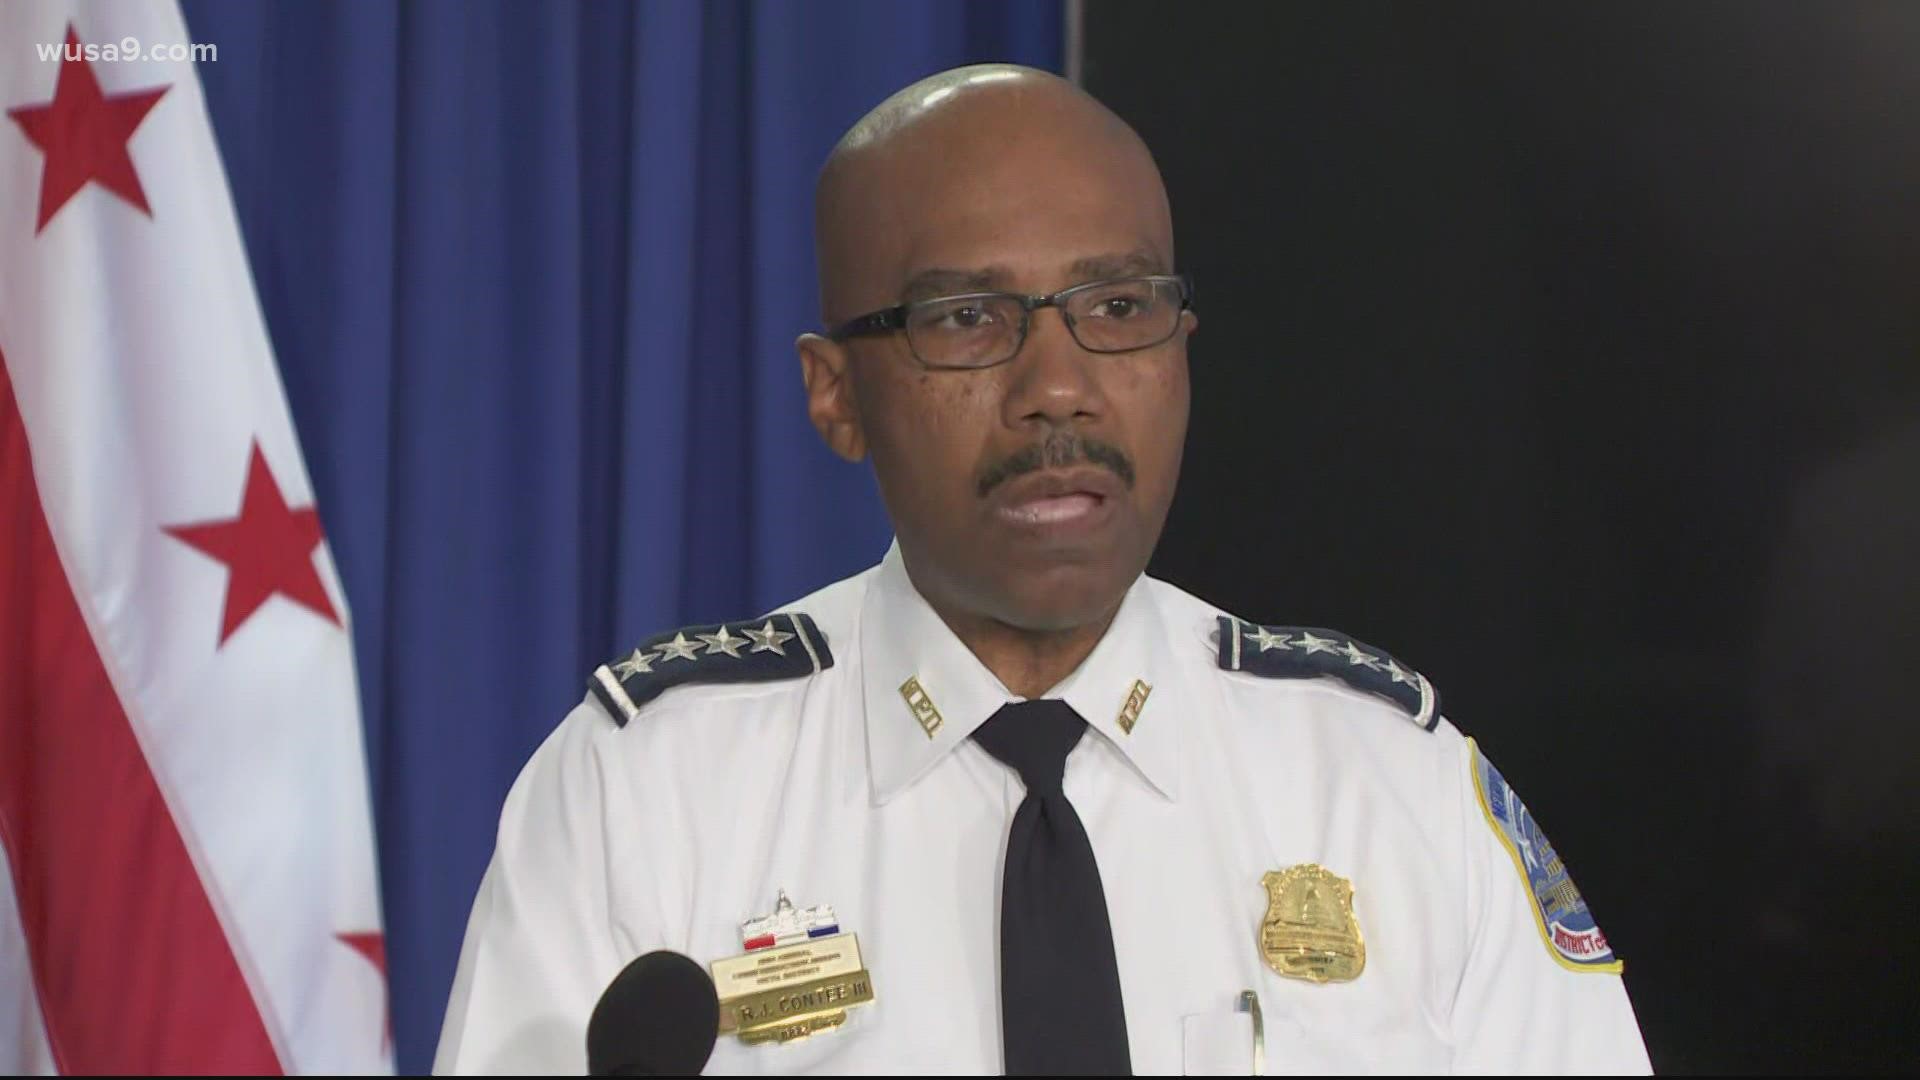 Chief Contee claims a struggle caused one of the officers' bodyworn cameras to turn off and back on again.